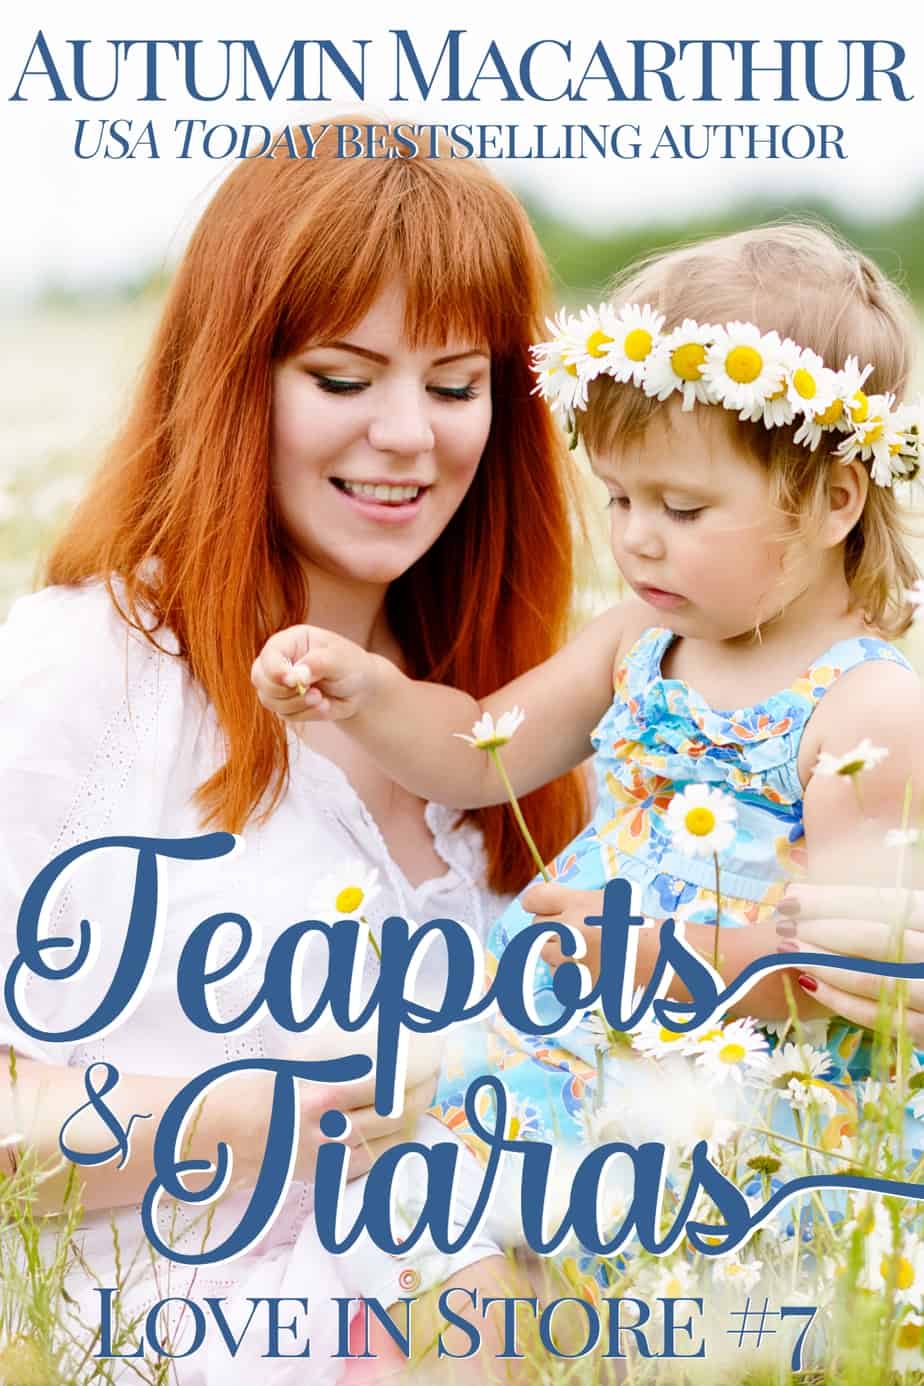 Cover image for London and Cambridge summer wedding sweet inspirational romance Teapots & Tiaras by Autumn Macarthur